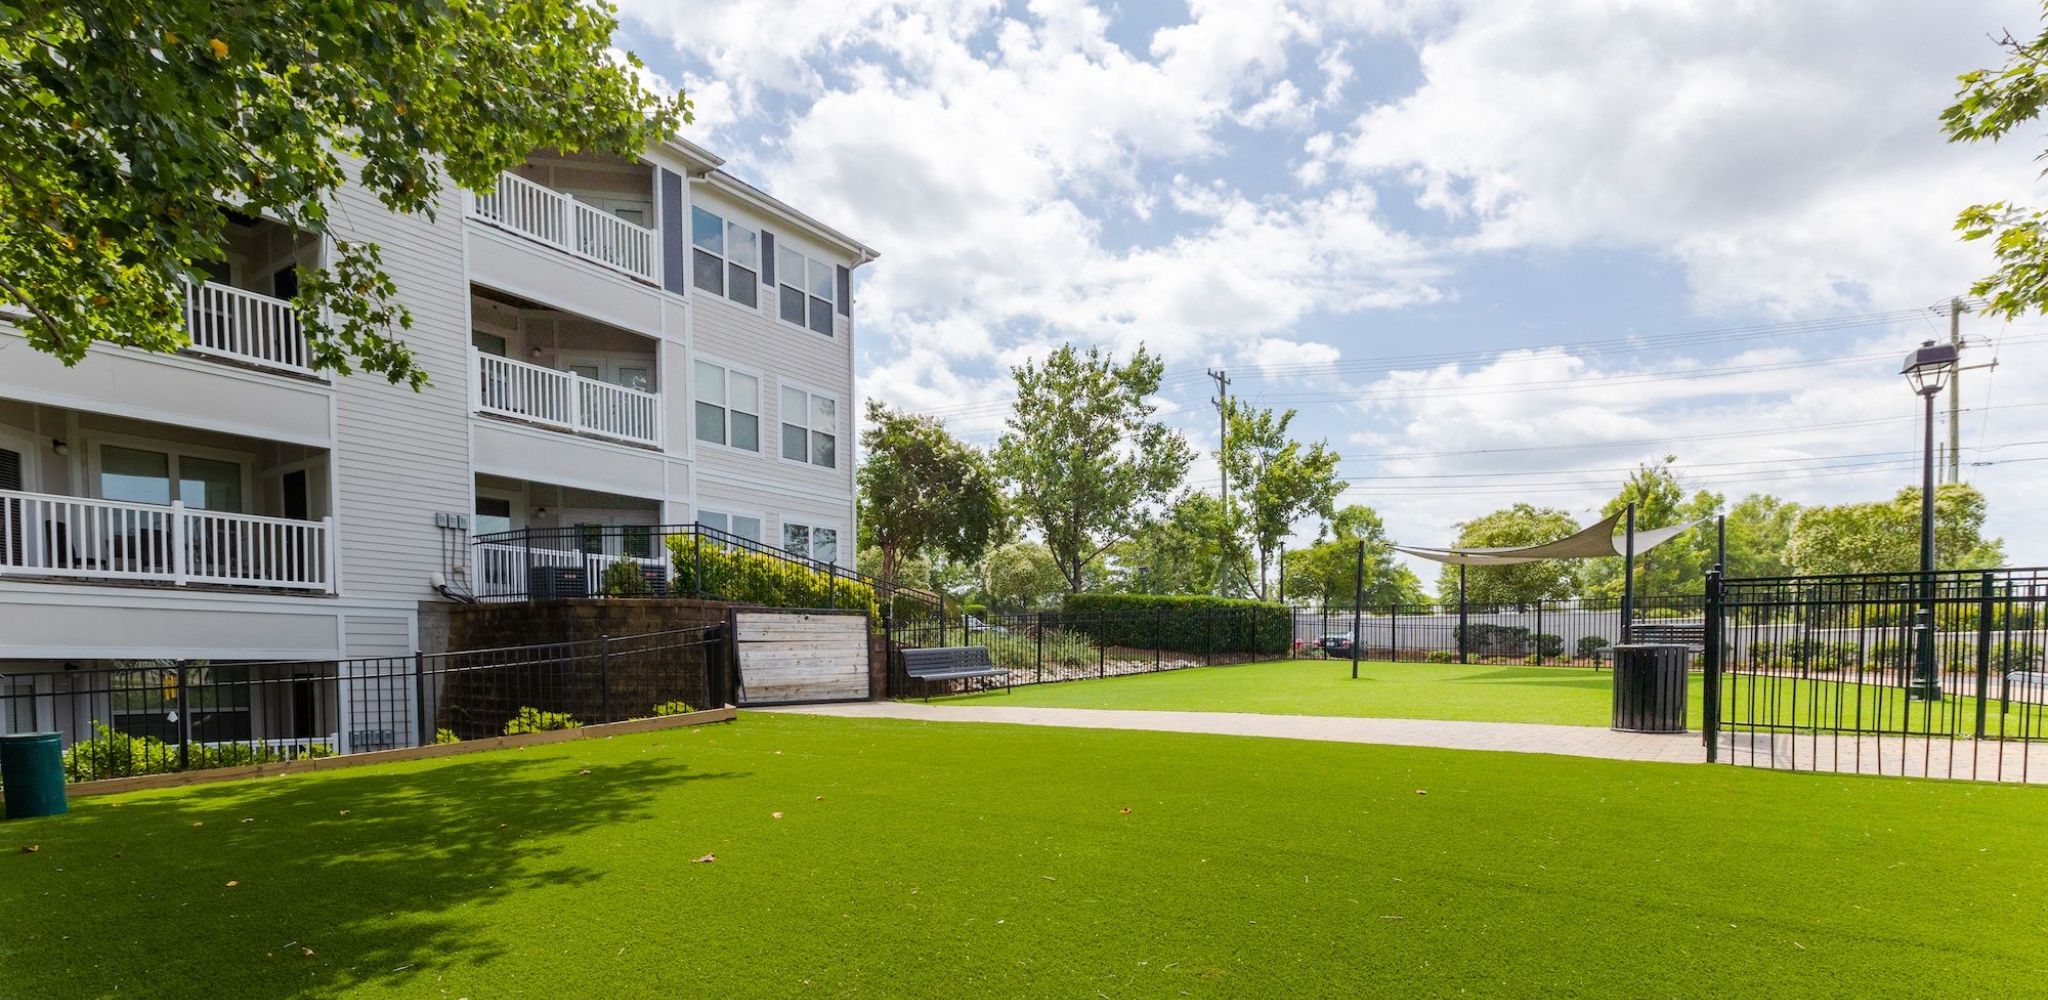 Hawthorne Davis Park apartments community exterior with fenced-in large green lawn